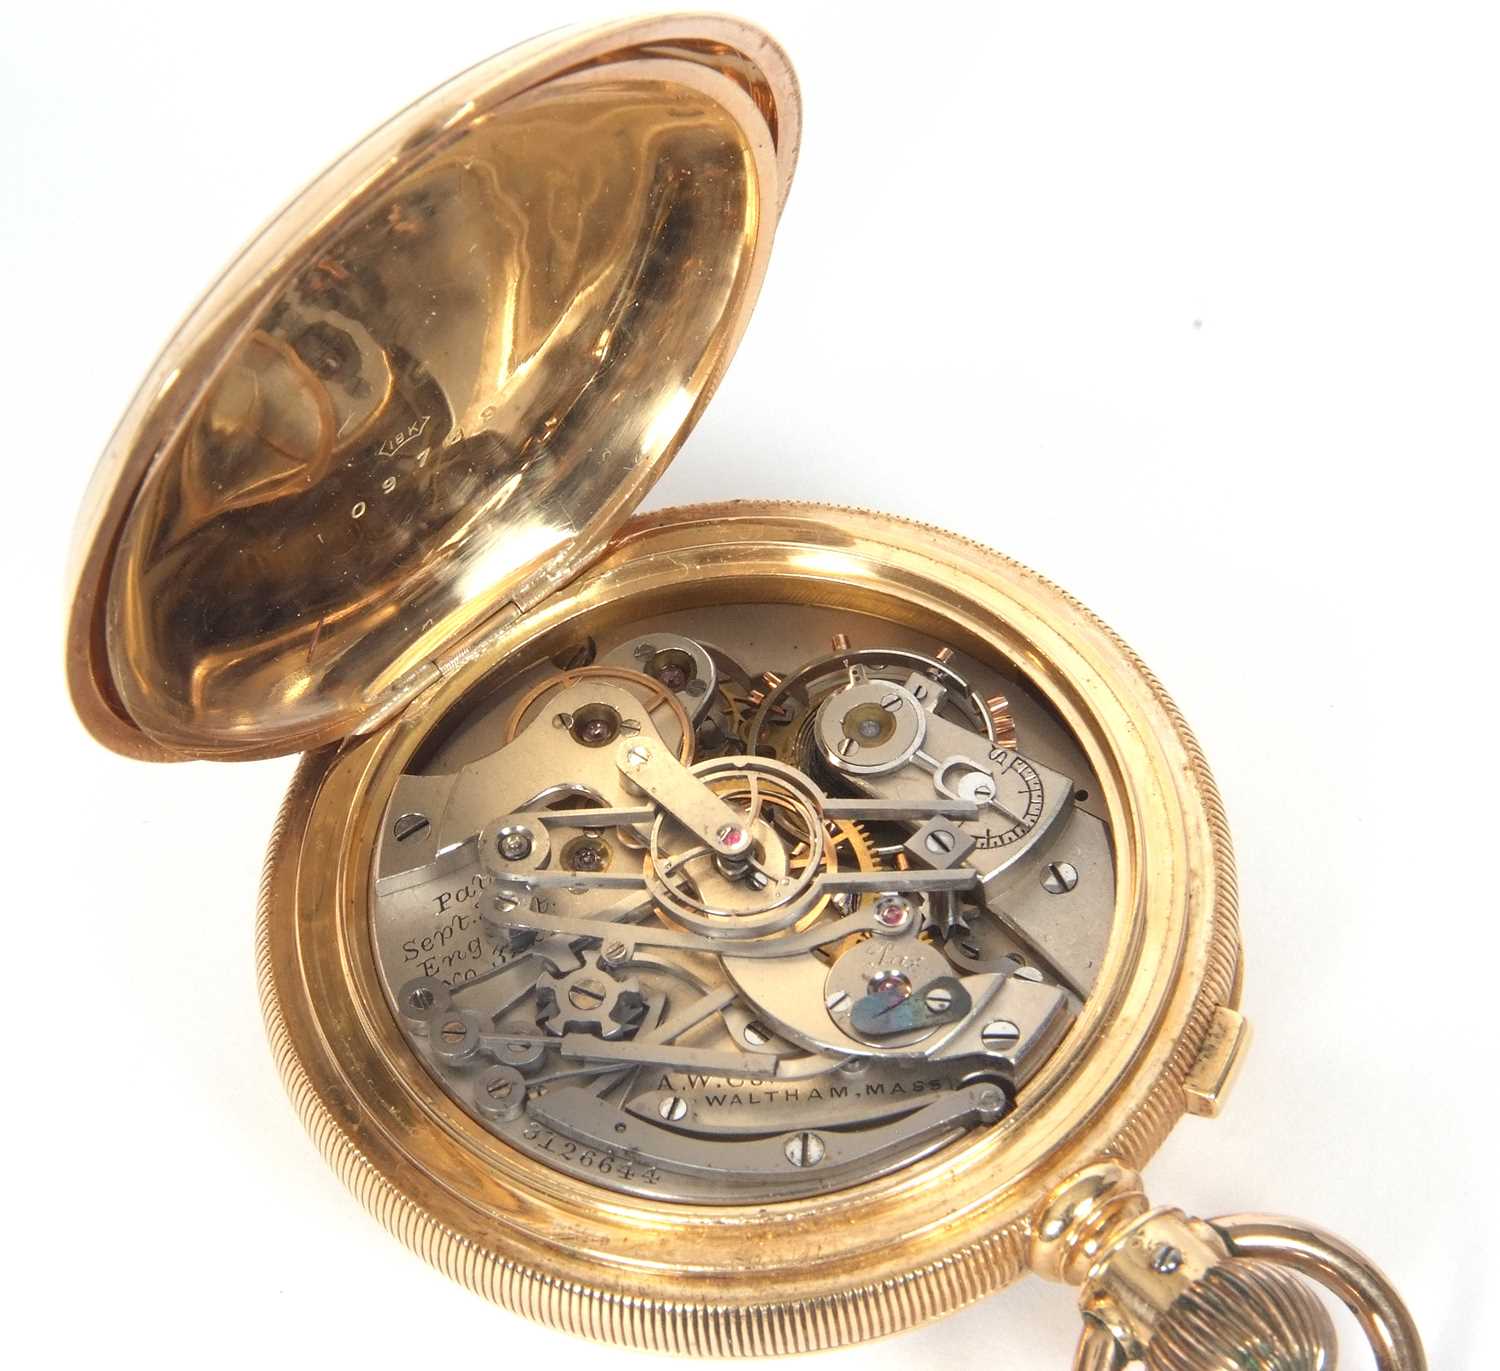 Waltham yellow metal chronograph pocket watch stamped 18k in the case back, it has a white enamel - Image 5 of 7